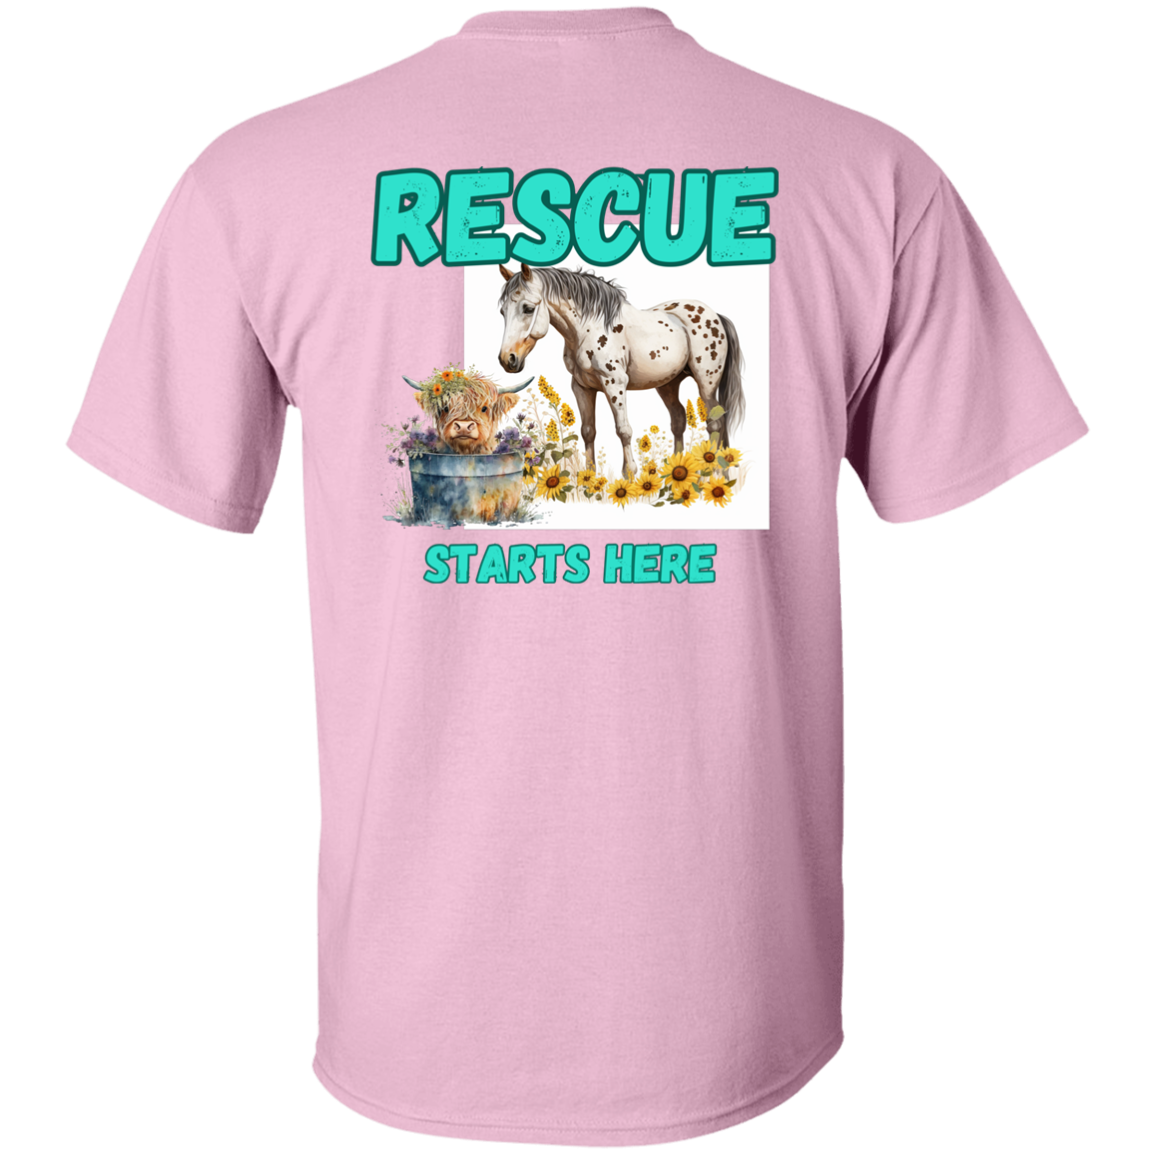 Rescue Starts Here T-Shirt For Donation of 10%